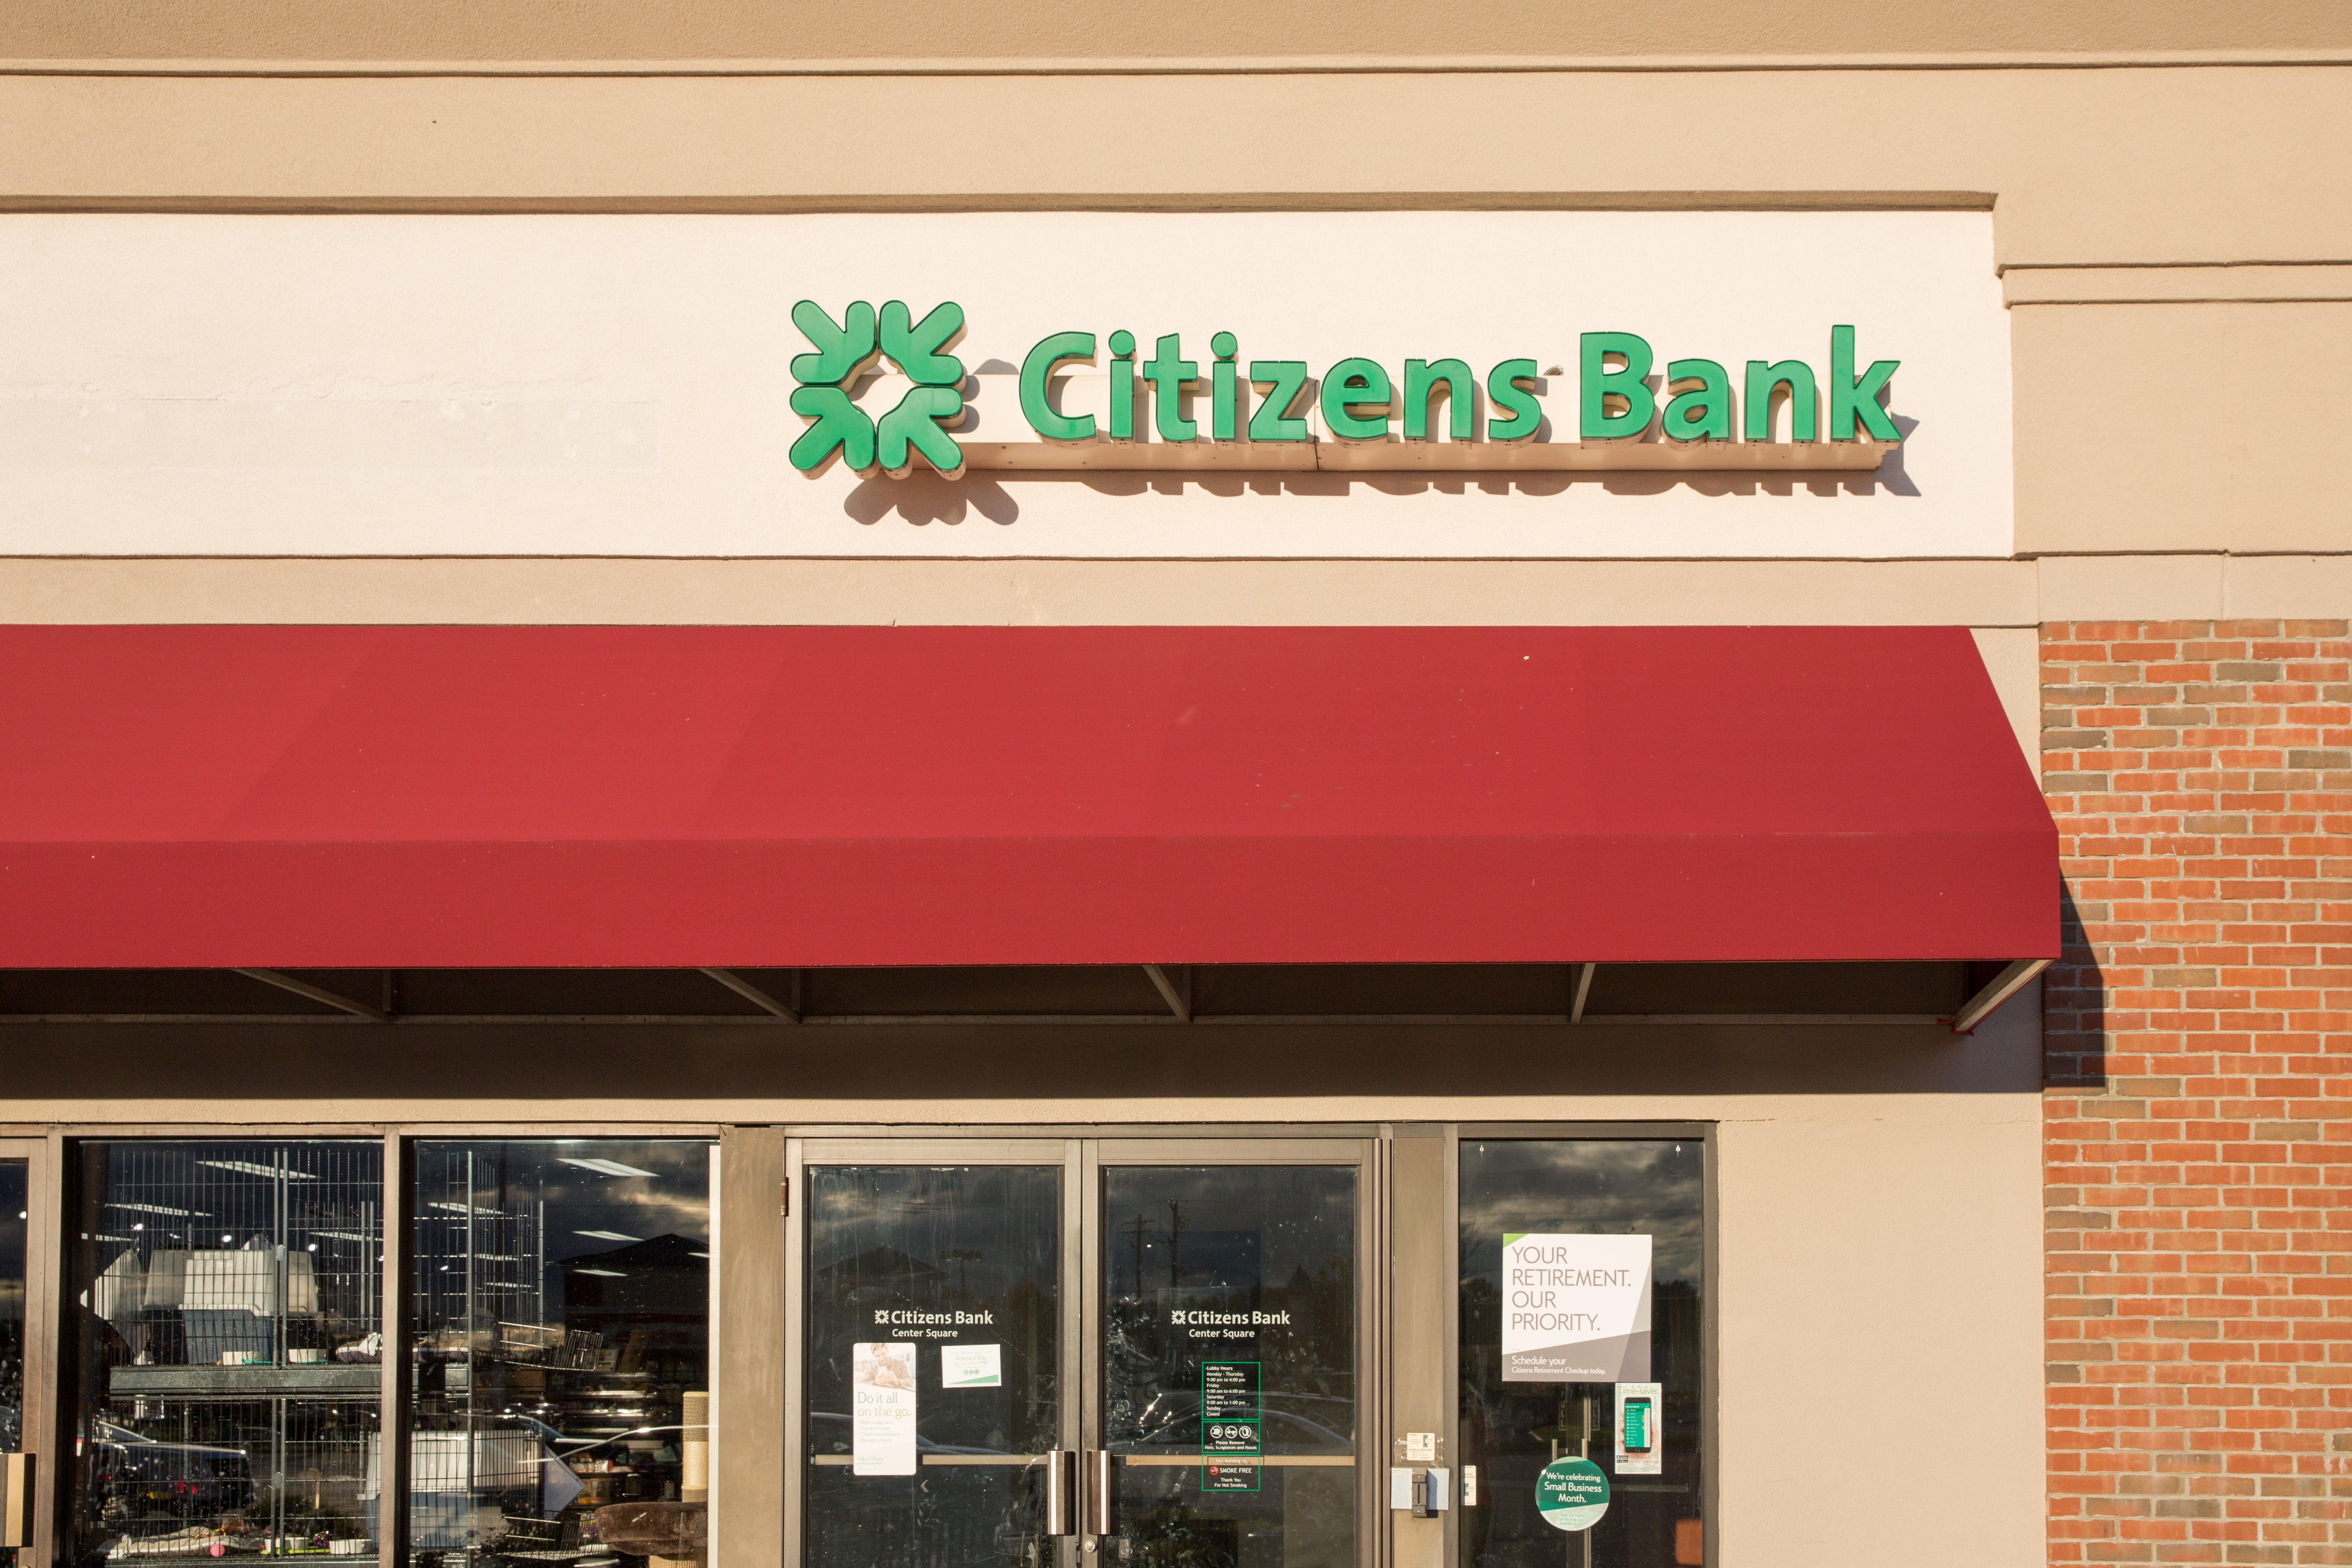 Local bank s green. Citizen банк. Citizens Financial. Citizens Financial Group. Collateral in Corporate Finance.